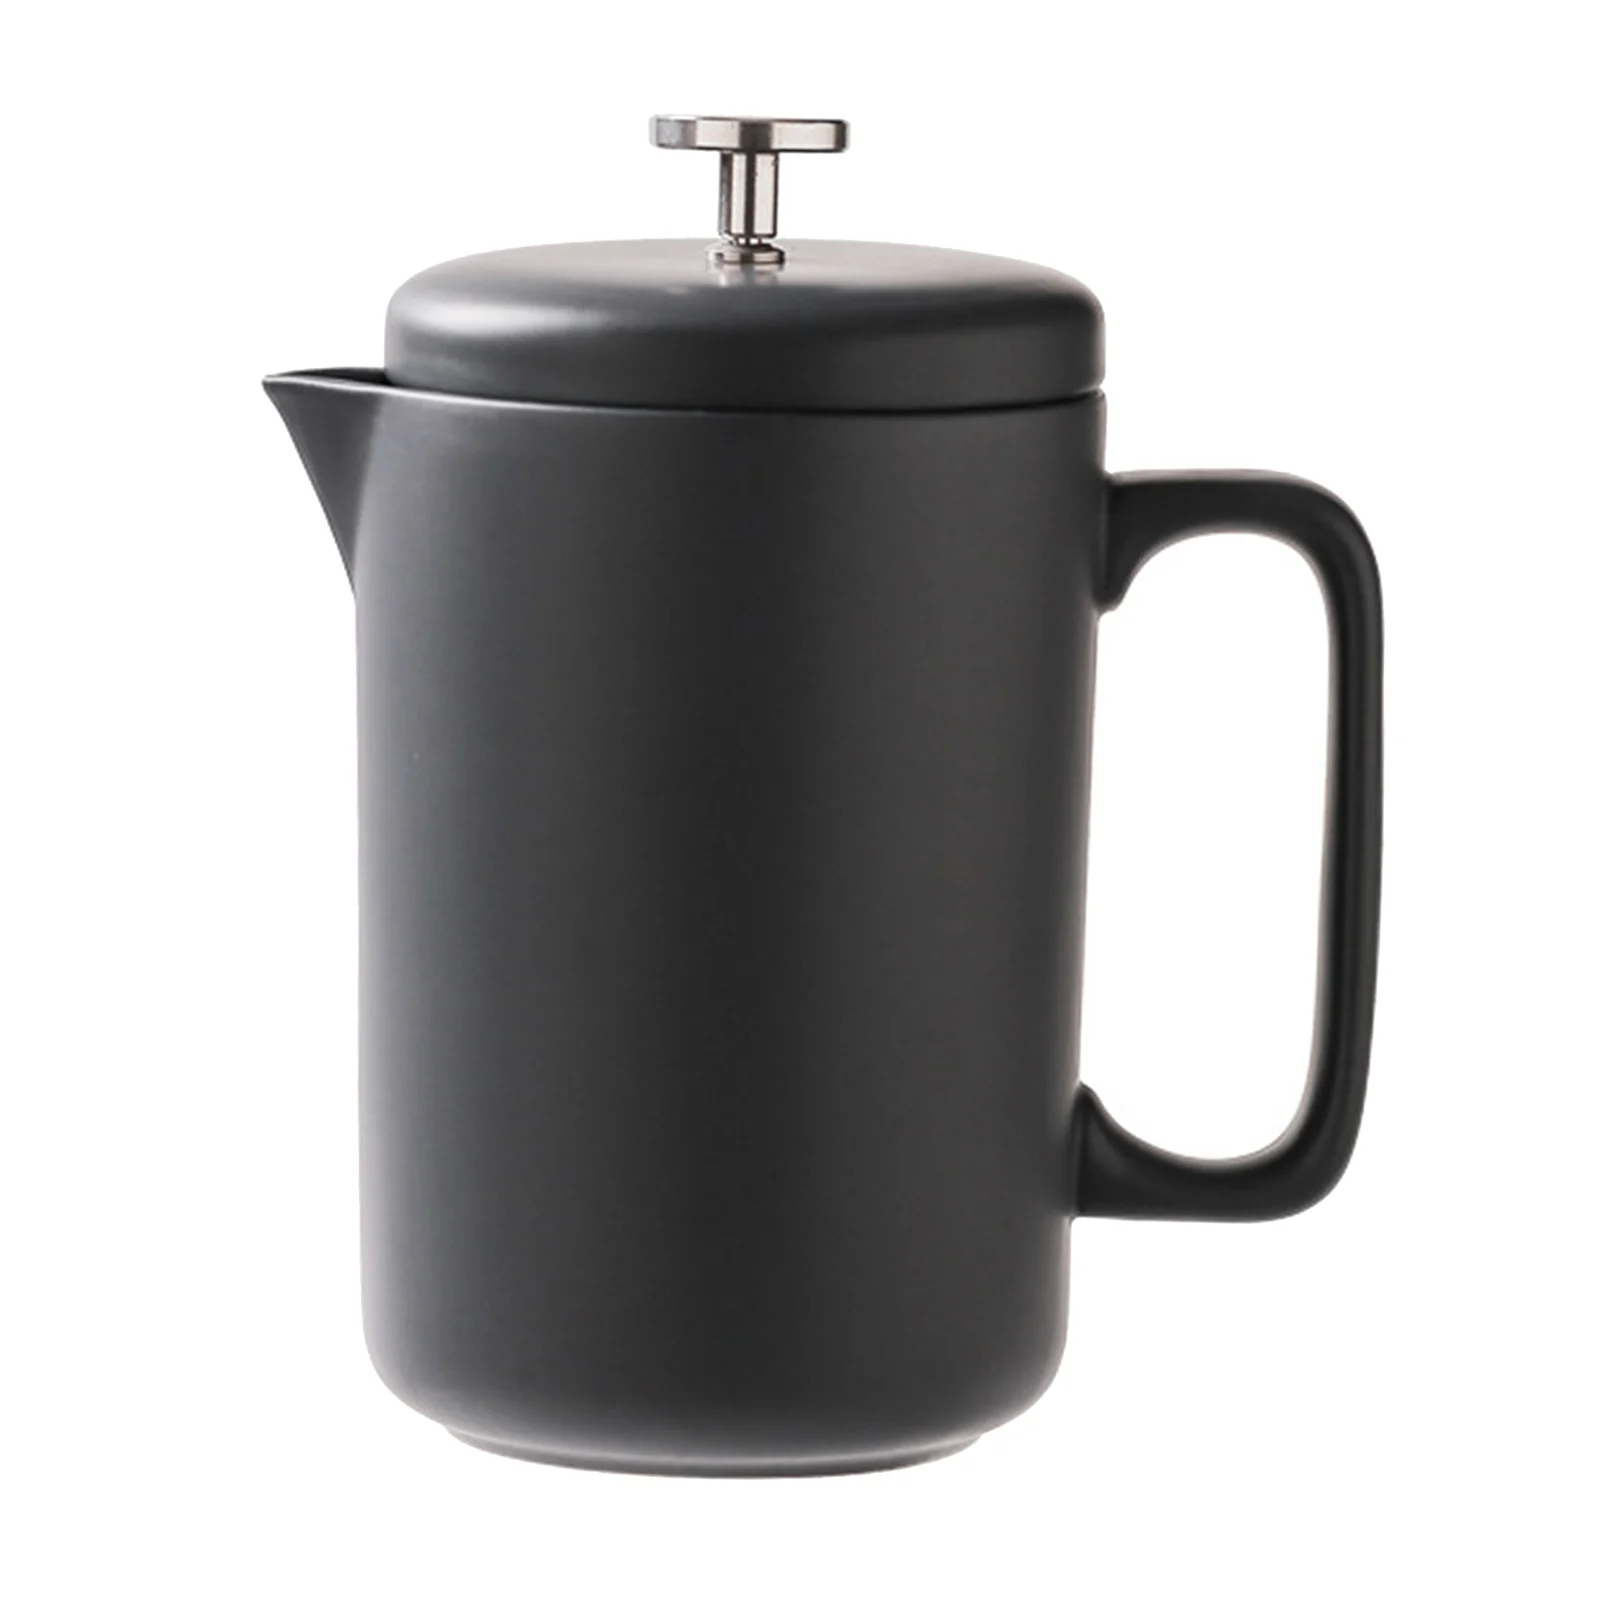 Durable Kitchen French Press Coffee Maker Ceramic with Handle for Good Coffee and Tea Office Rust-Free Dishwasher Safe